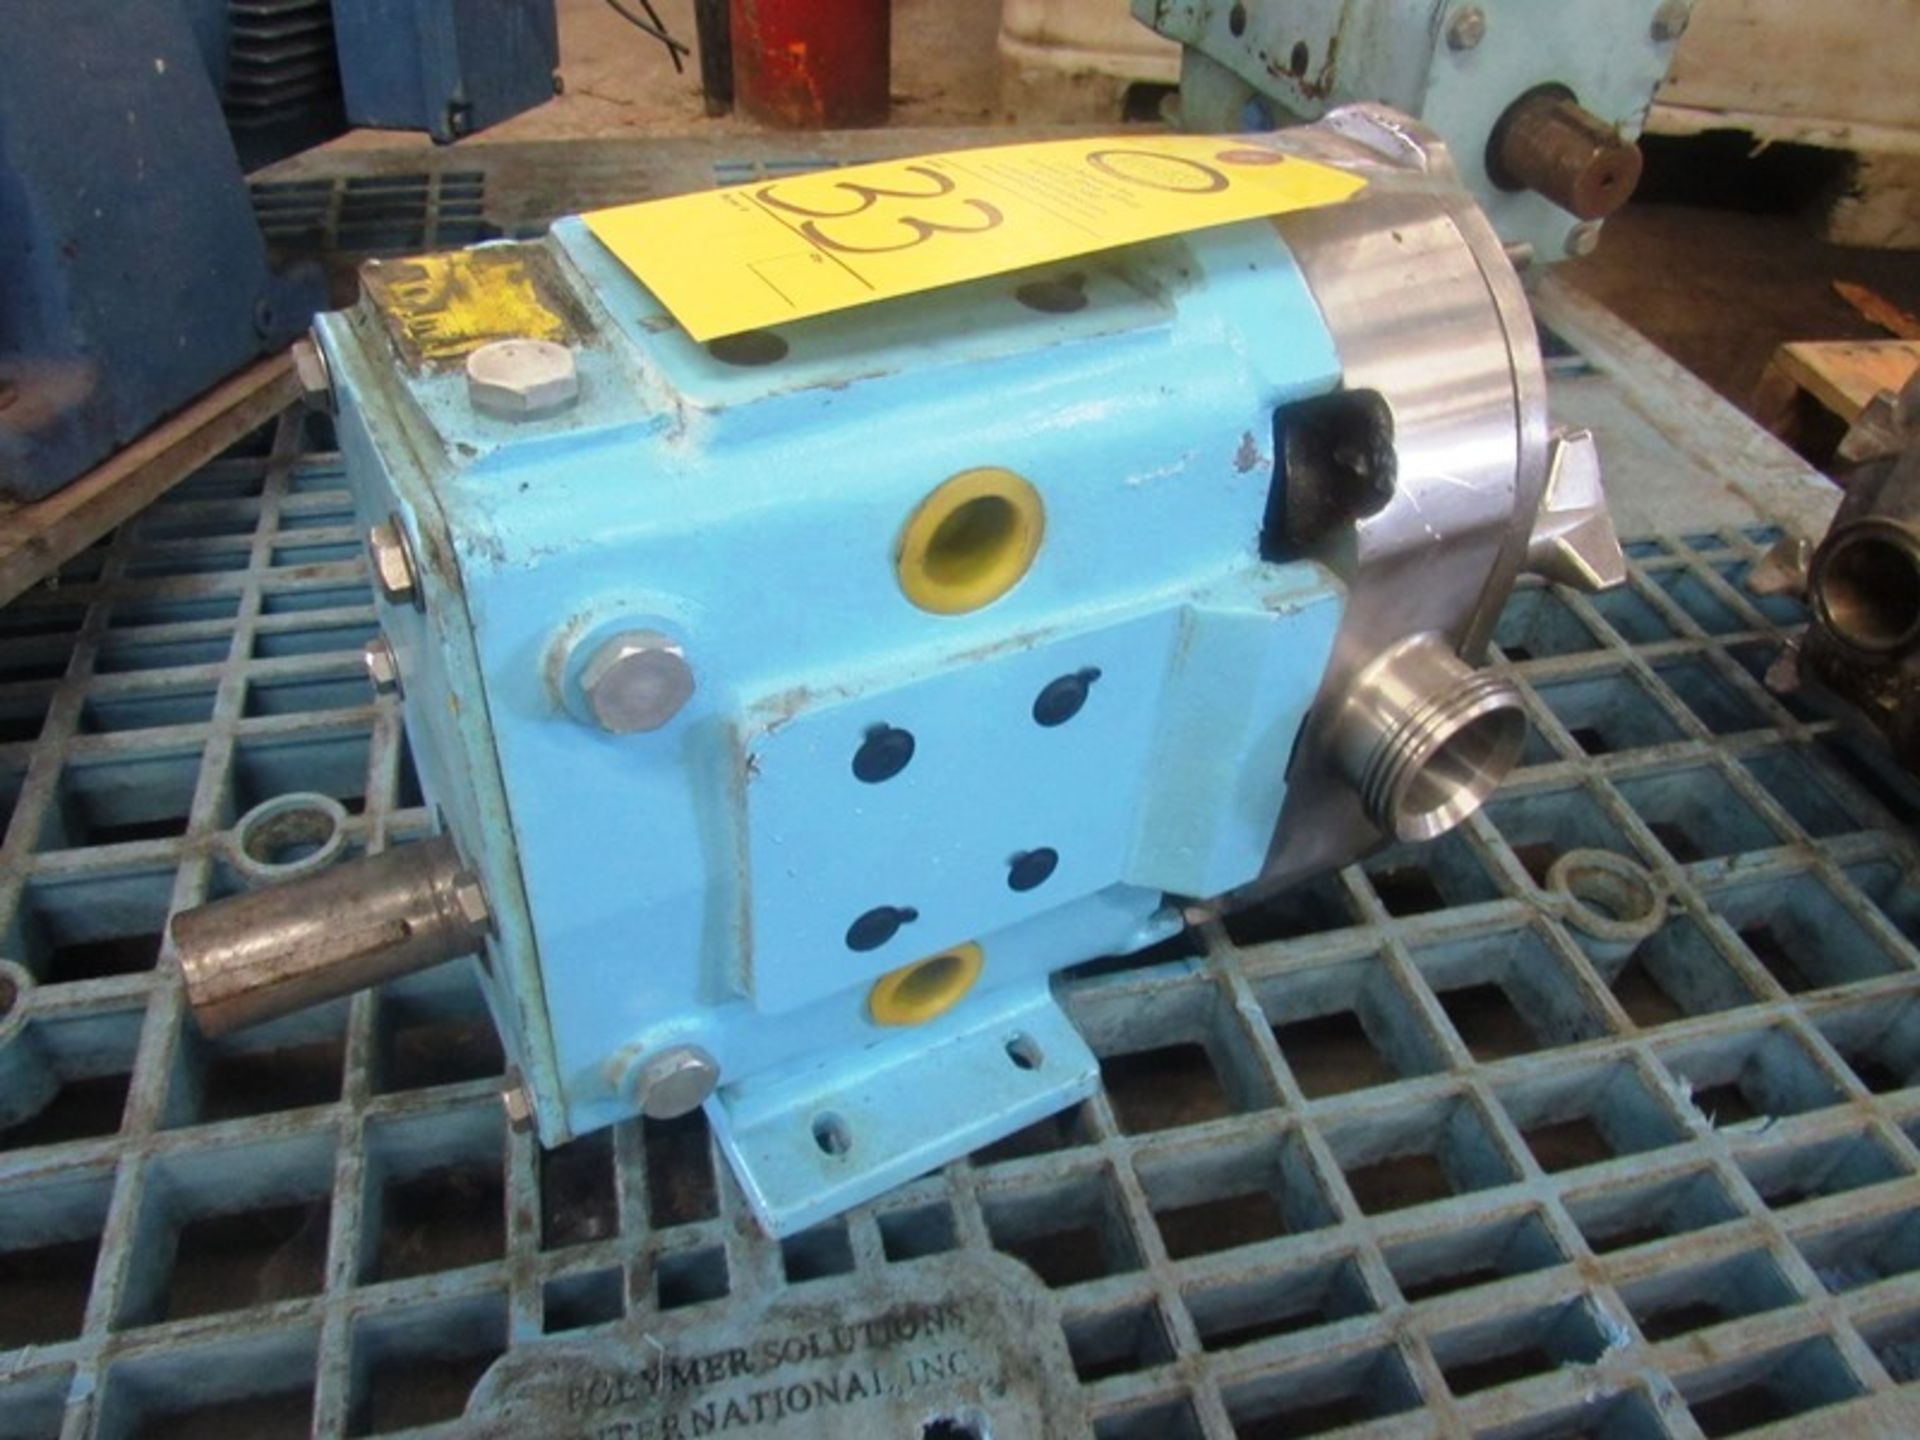 Waukesha Mdl. 030 Positive Displacement Pump, 1 1/2" inlet/outlet - Image 2 of 2